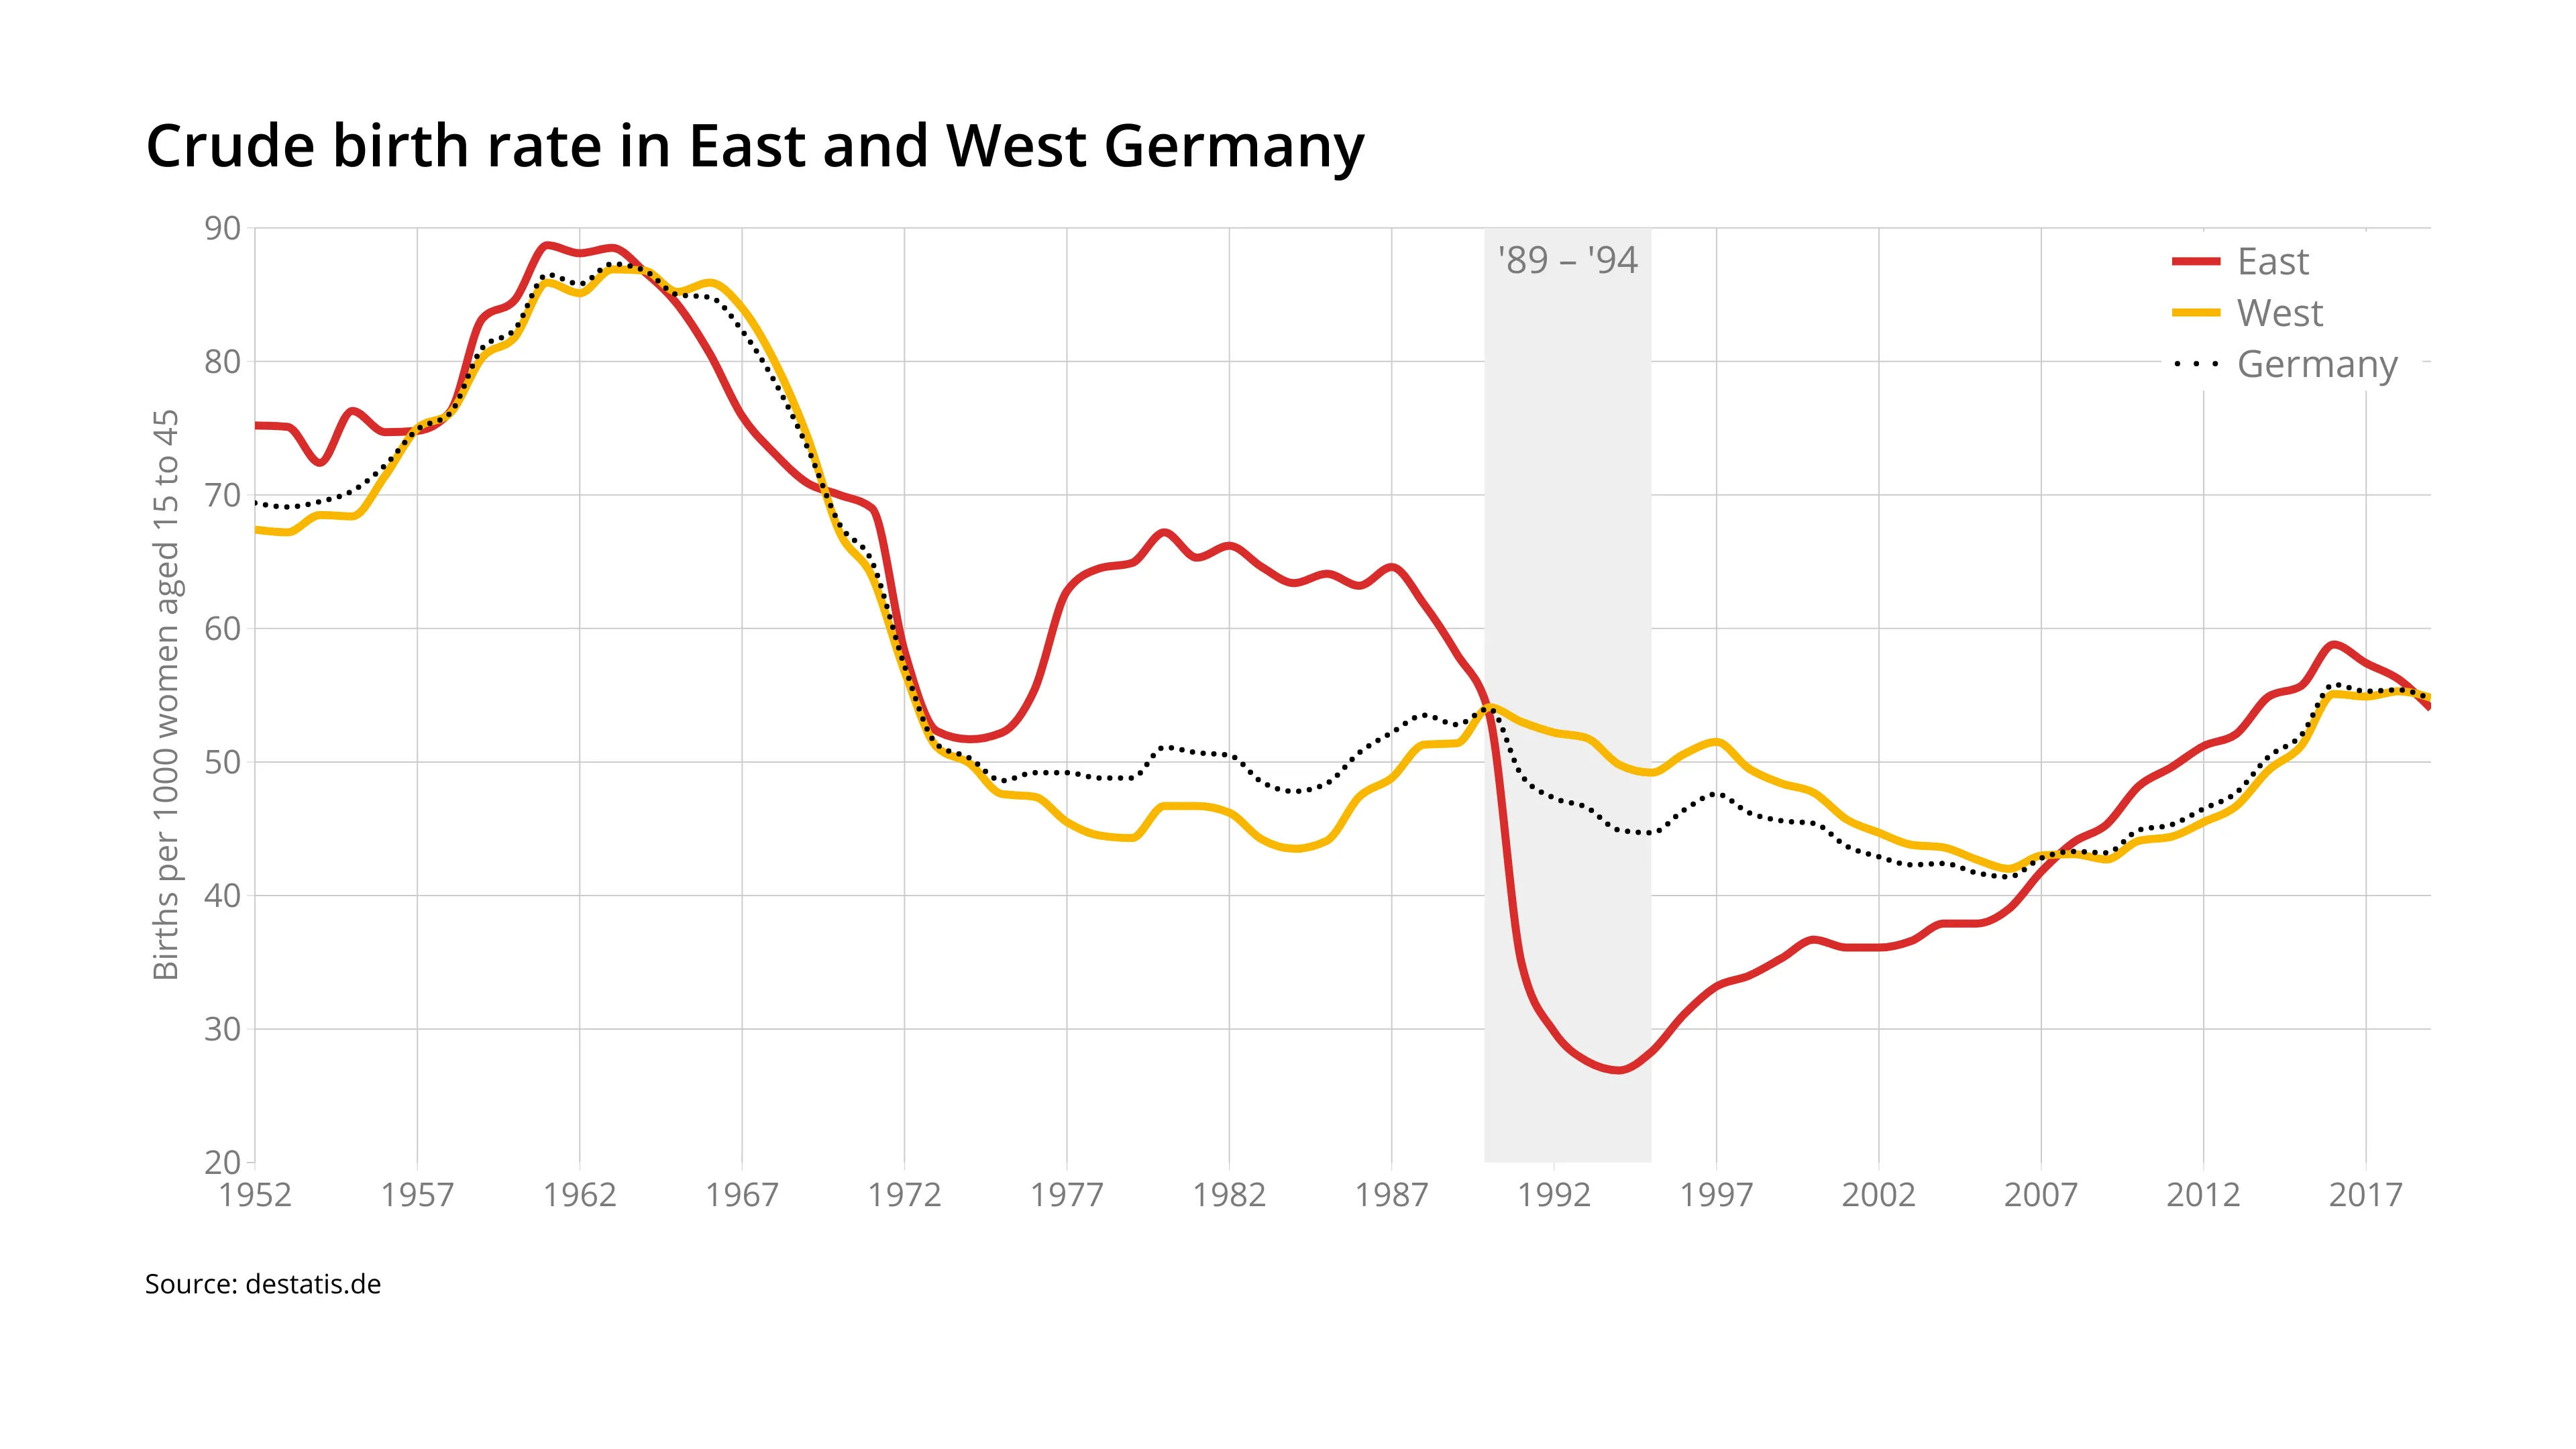 Crude birth rate in East and West Germany